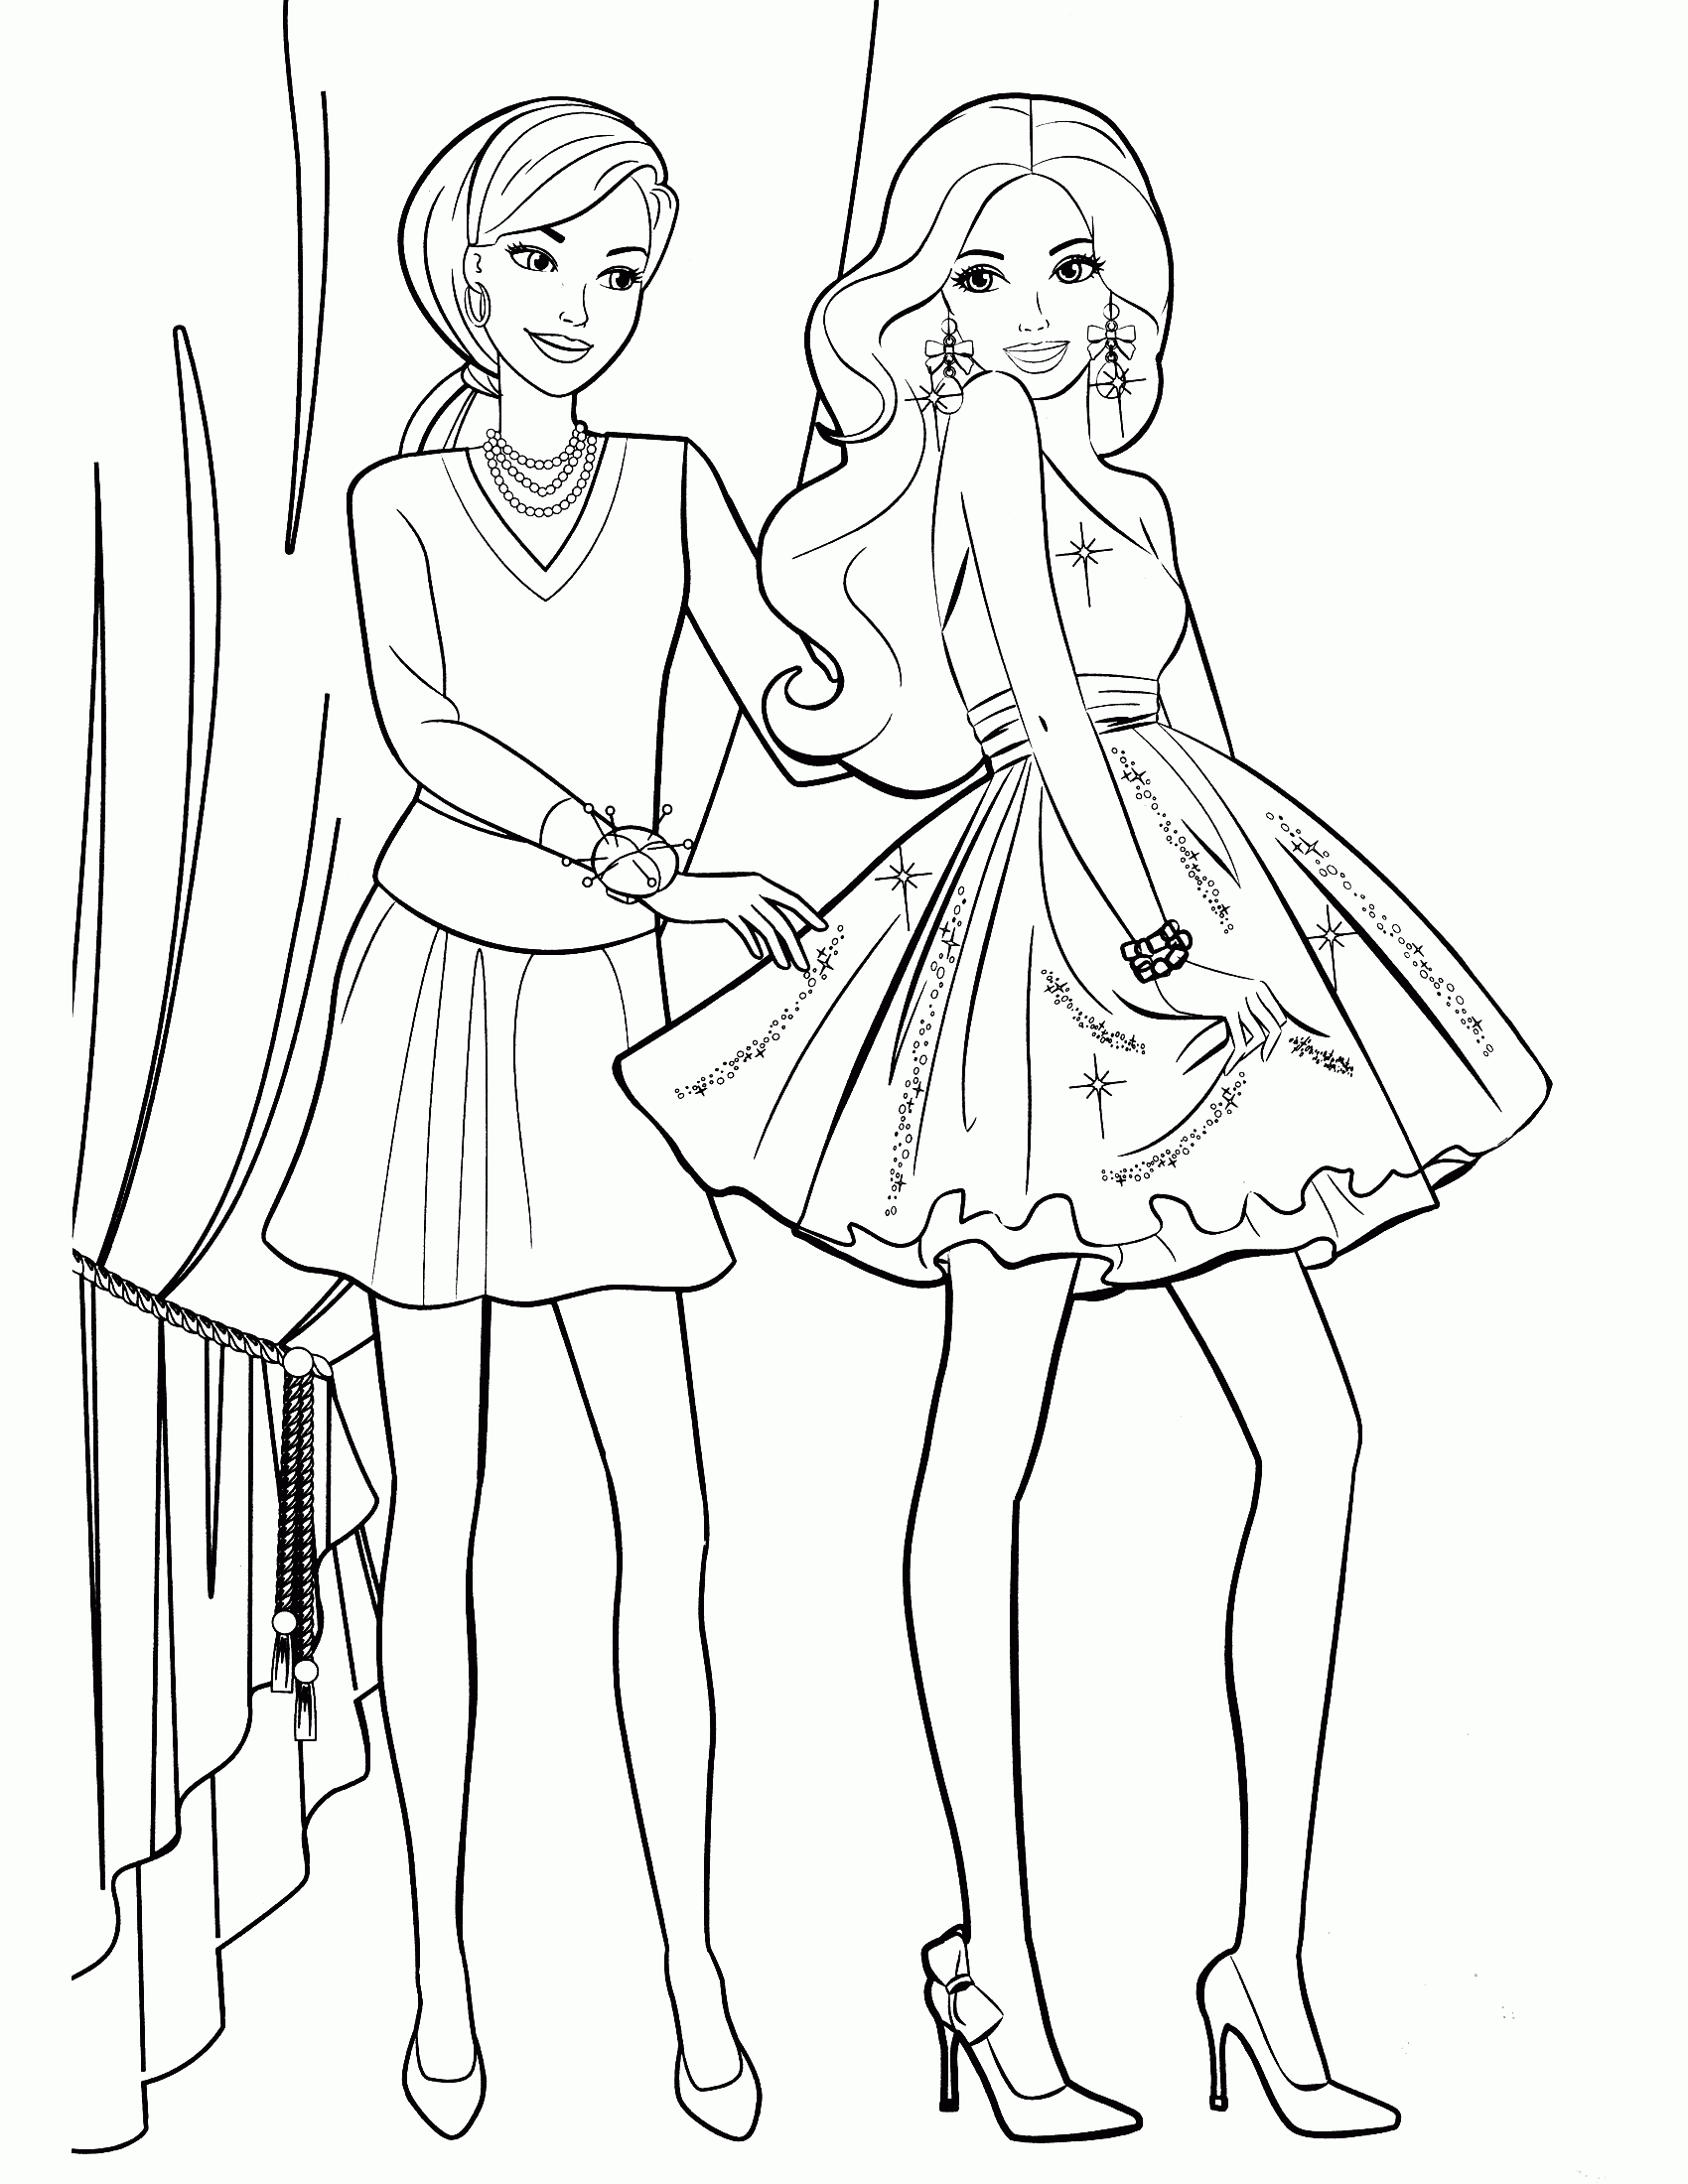 Barbie Gymnastic Coloring Pages For Girls Coloring Pages For All